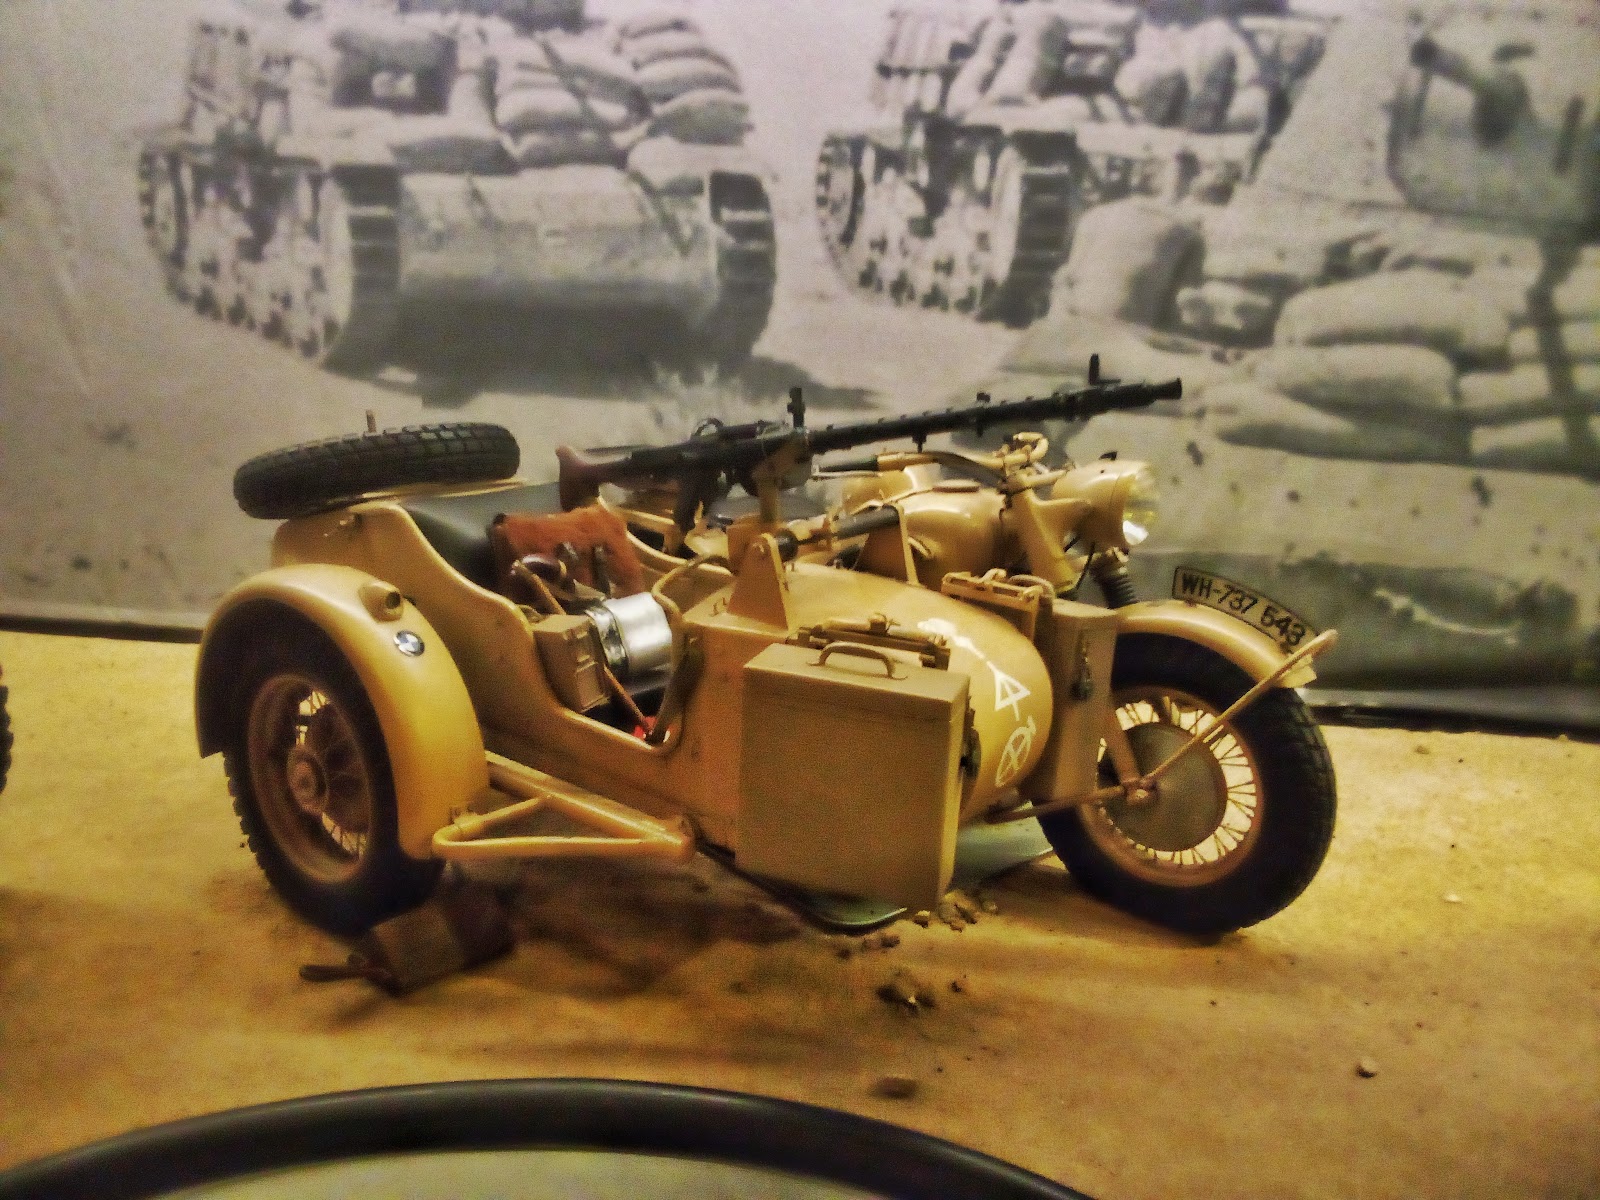 BMW R75 Motorcycle & Sidecar Used by Nazi Germany Military